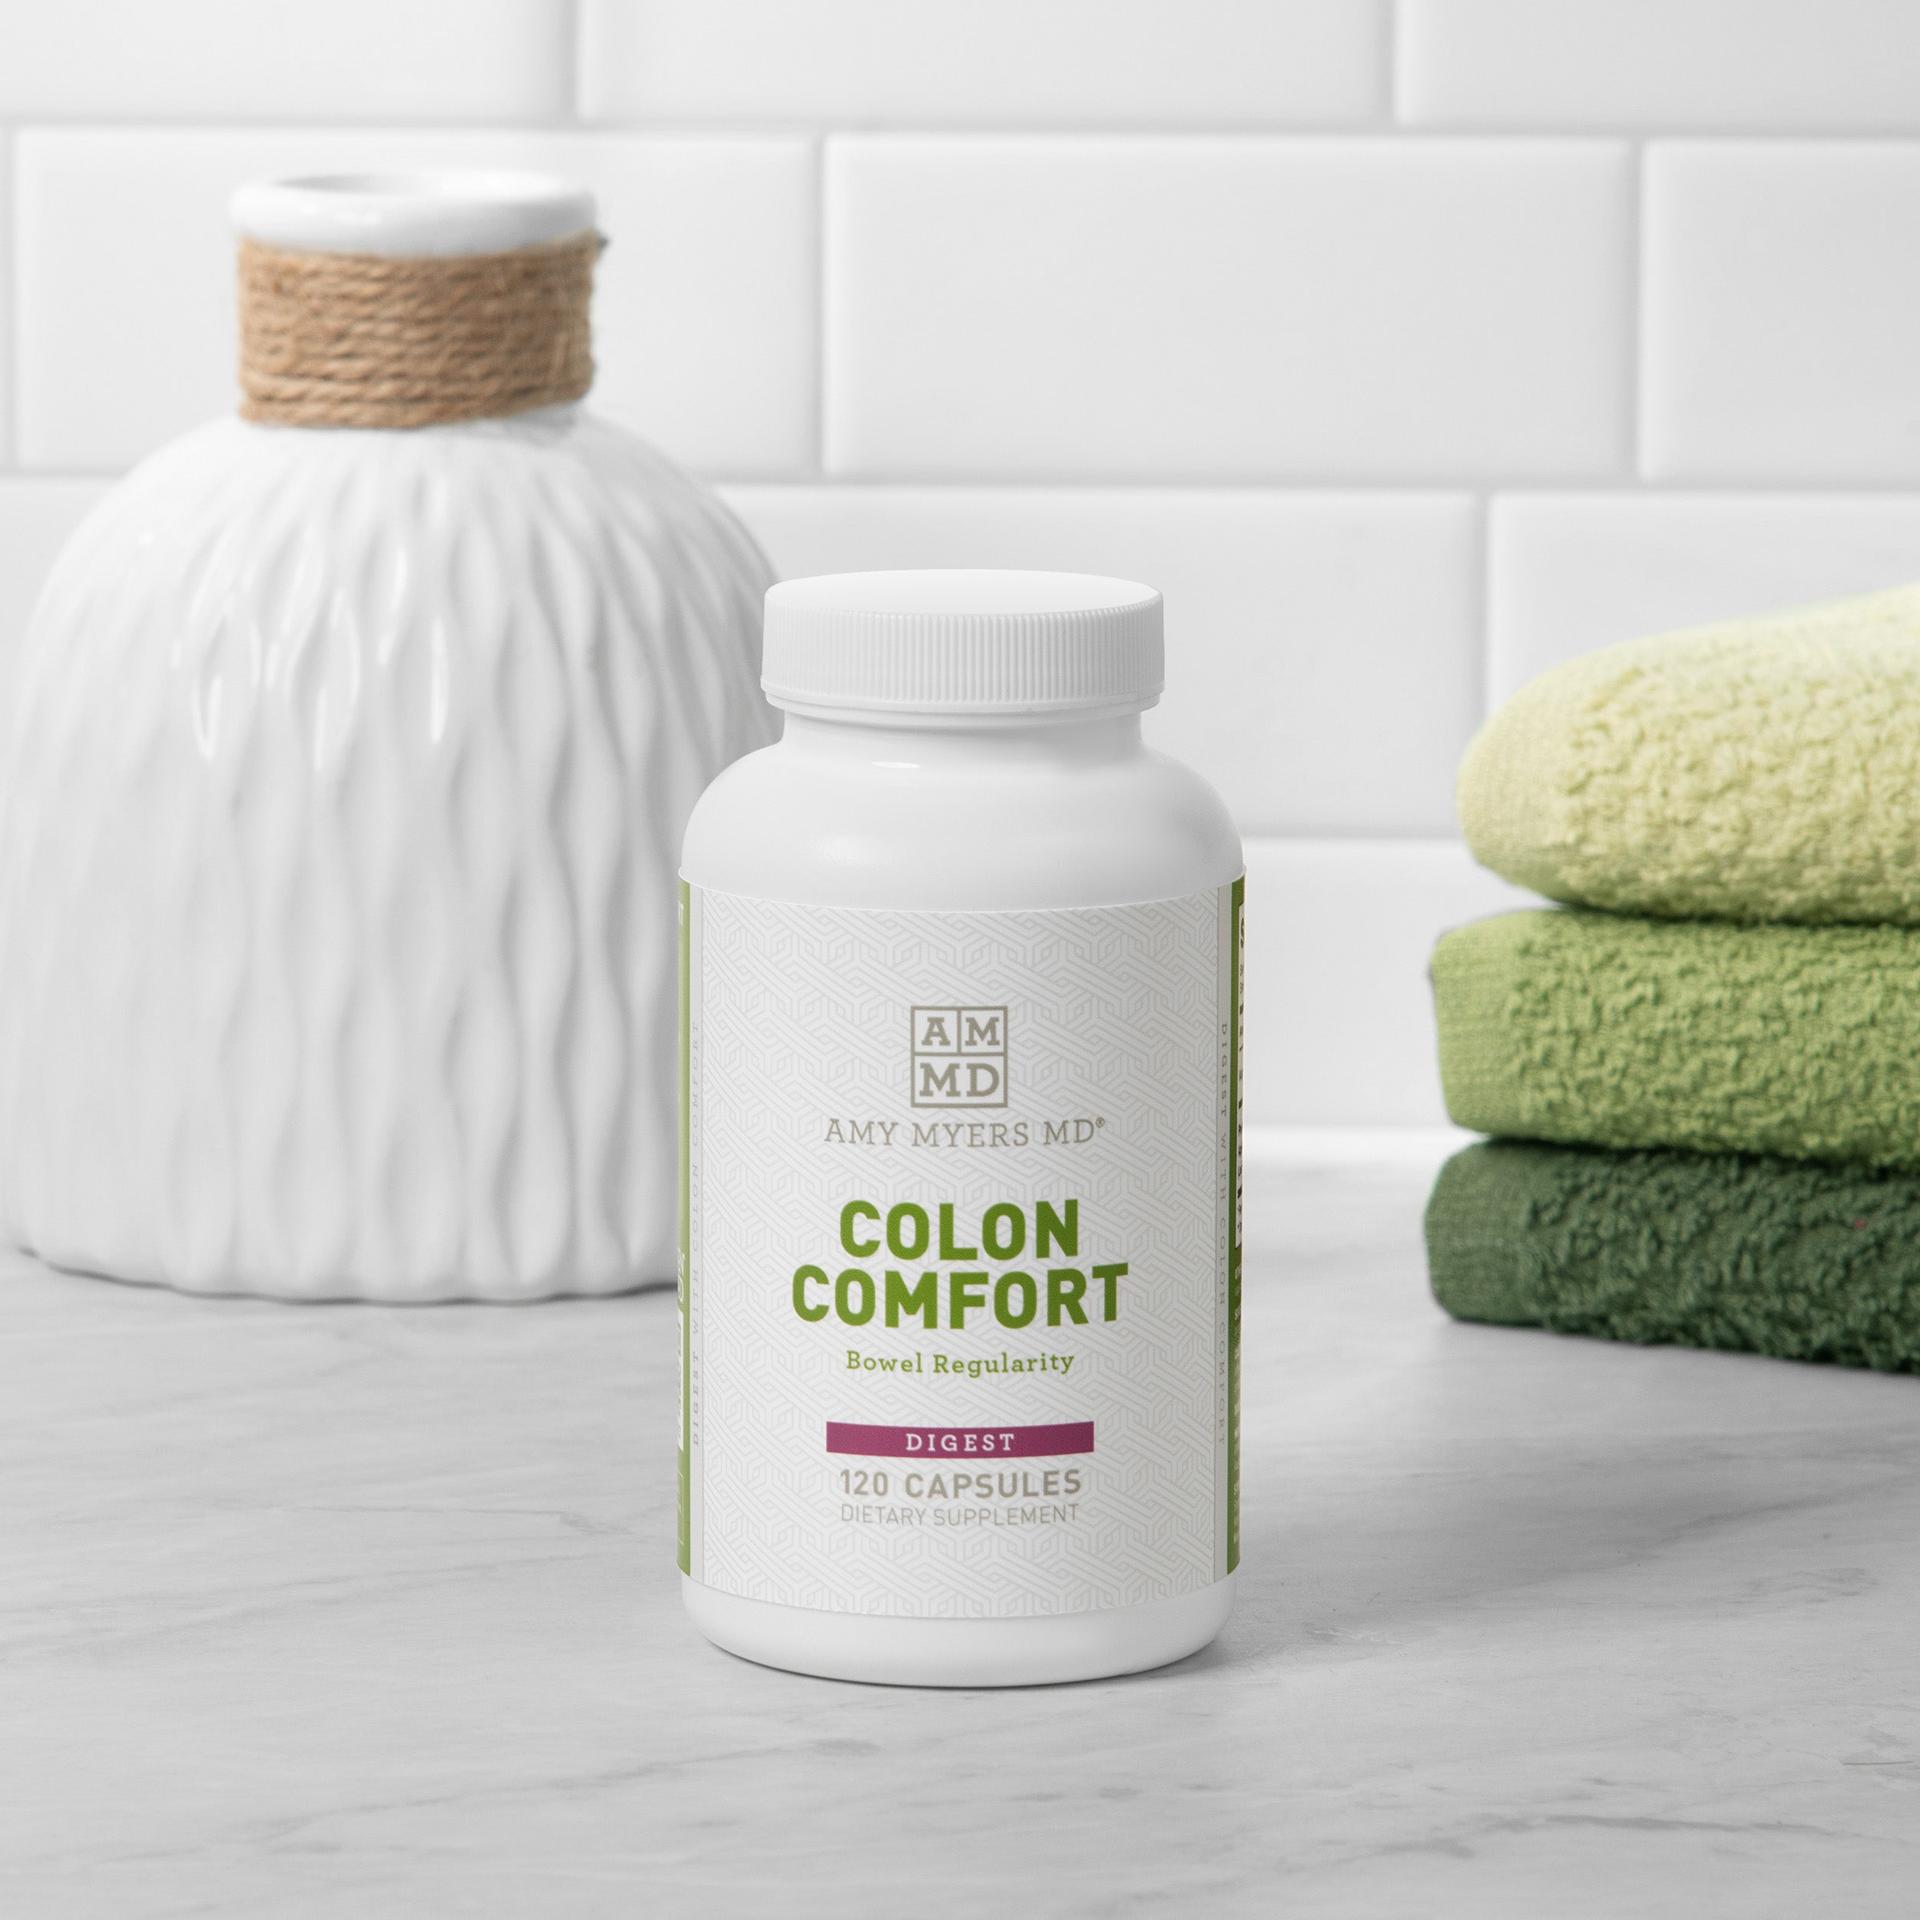 120 count capsule bottle of Colon Comfort sitting on a gray granite countertop with green colored towels, white vase, and white tile background.